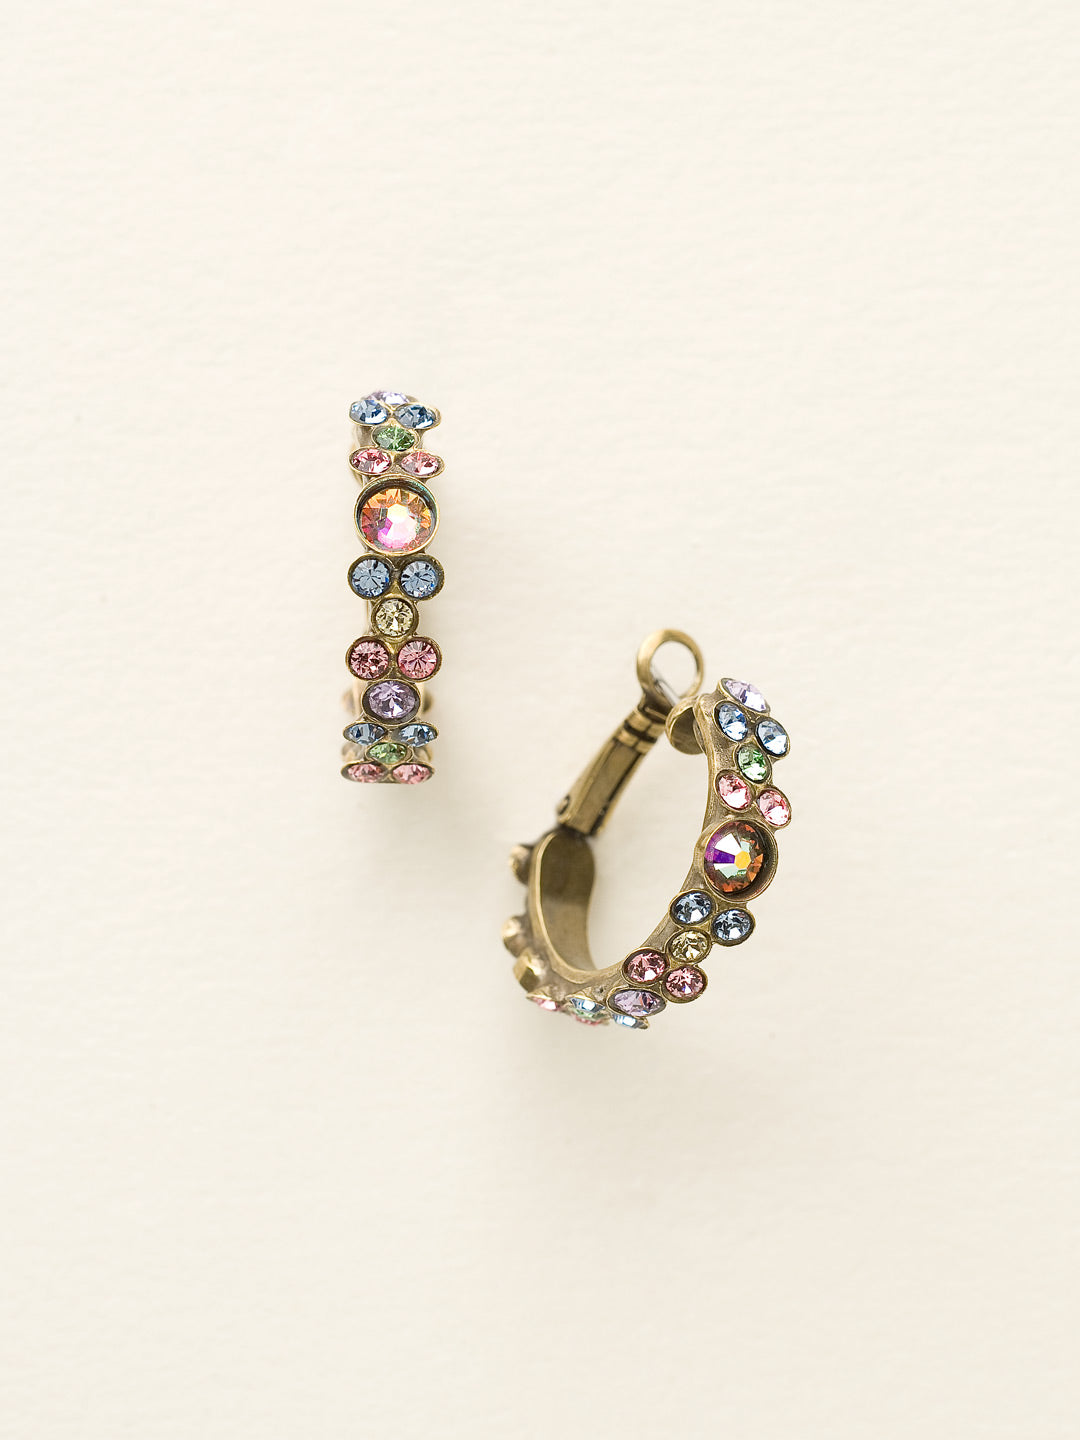 Floral Hoop Earrings - EBP15AGSPR - <p>Intricate design, infused with gorgeous shine. A motif of floral clusters is featured here on a small, delicate hoop with a hinged post backing. From Sorrelli's Spring Rain collection in our Antique Gold-tone finish.</p>